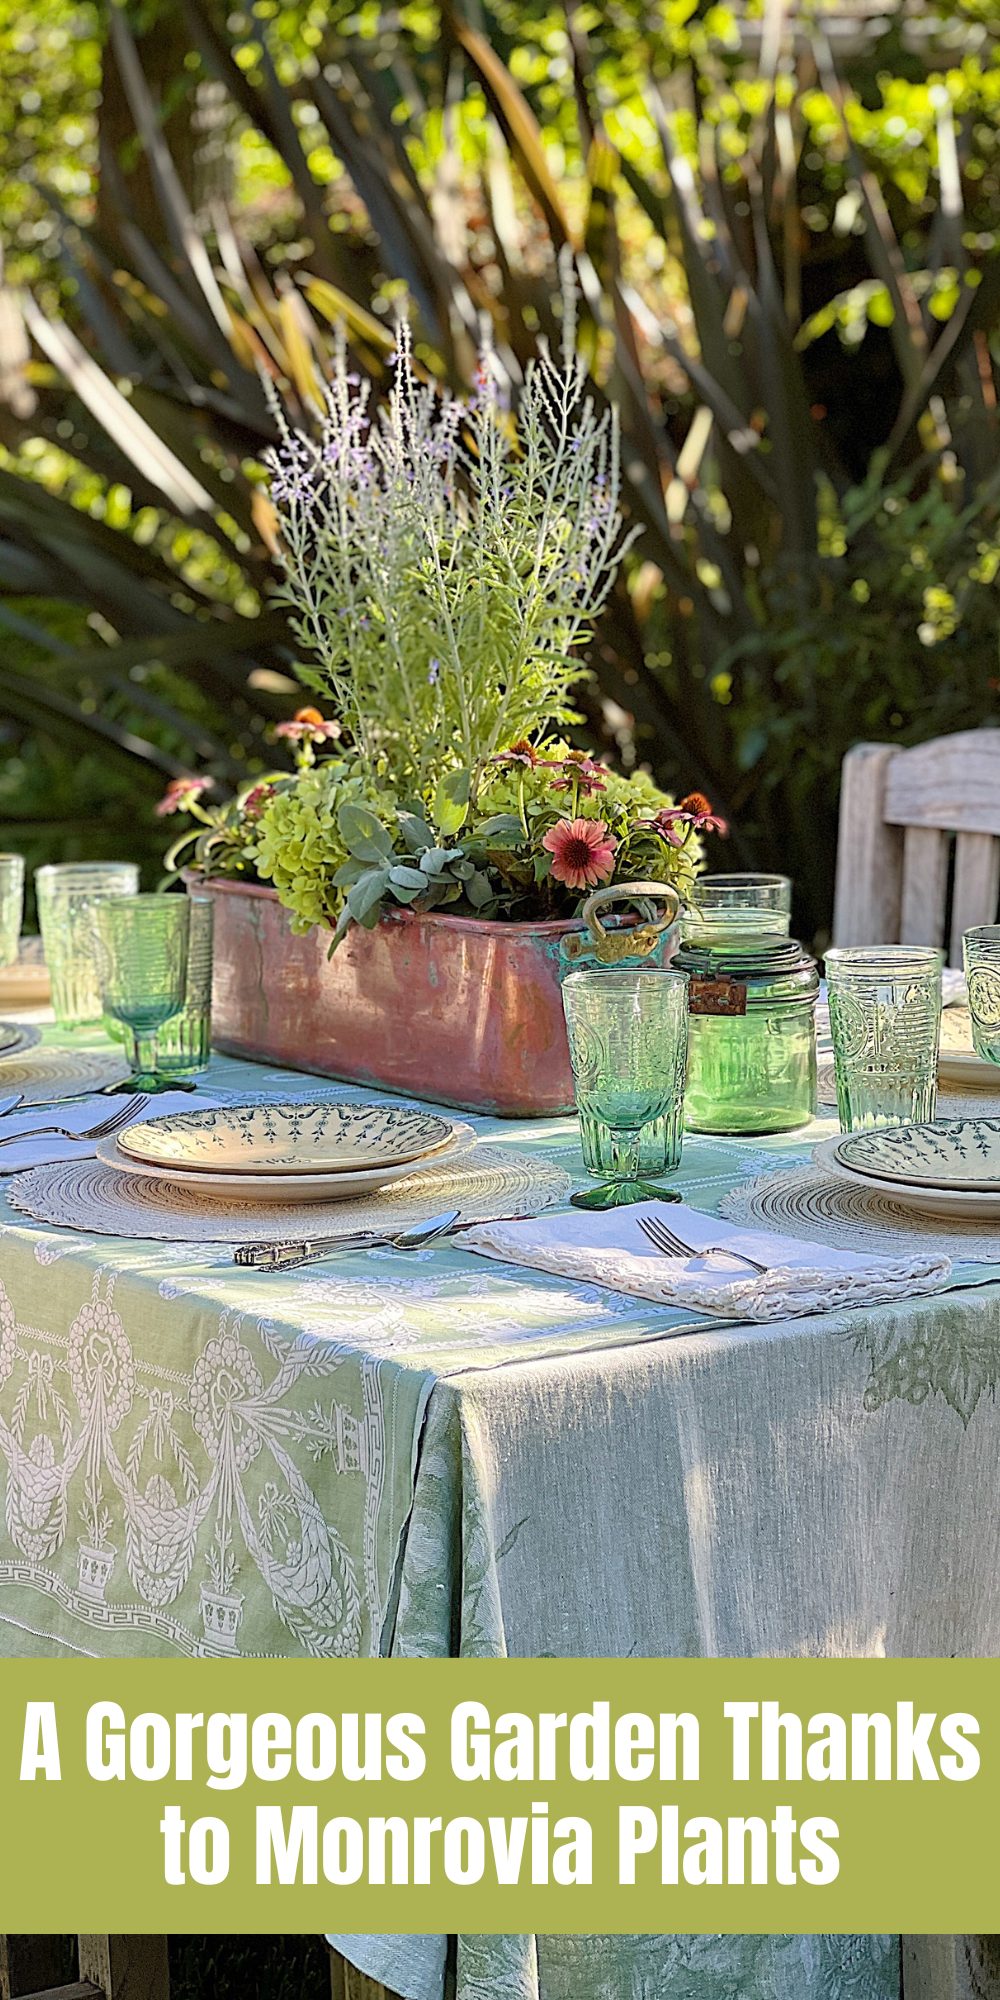 I am hosting an end of summer dinner party, set in our garden which is lush and gorgeous thanks to Monrovia plants.